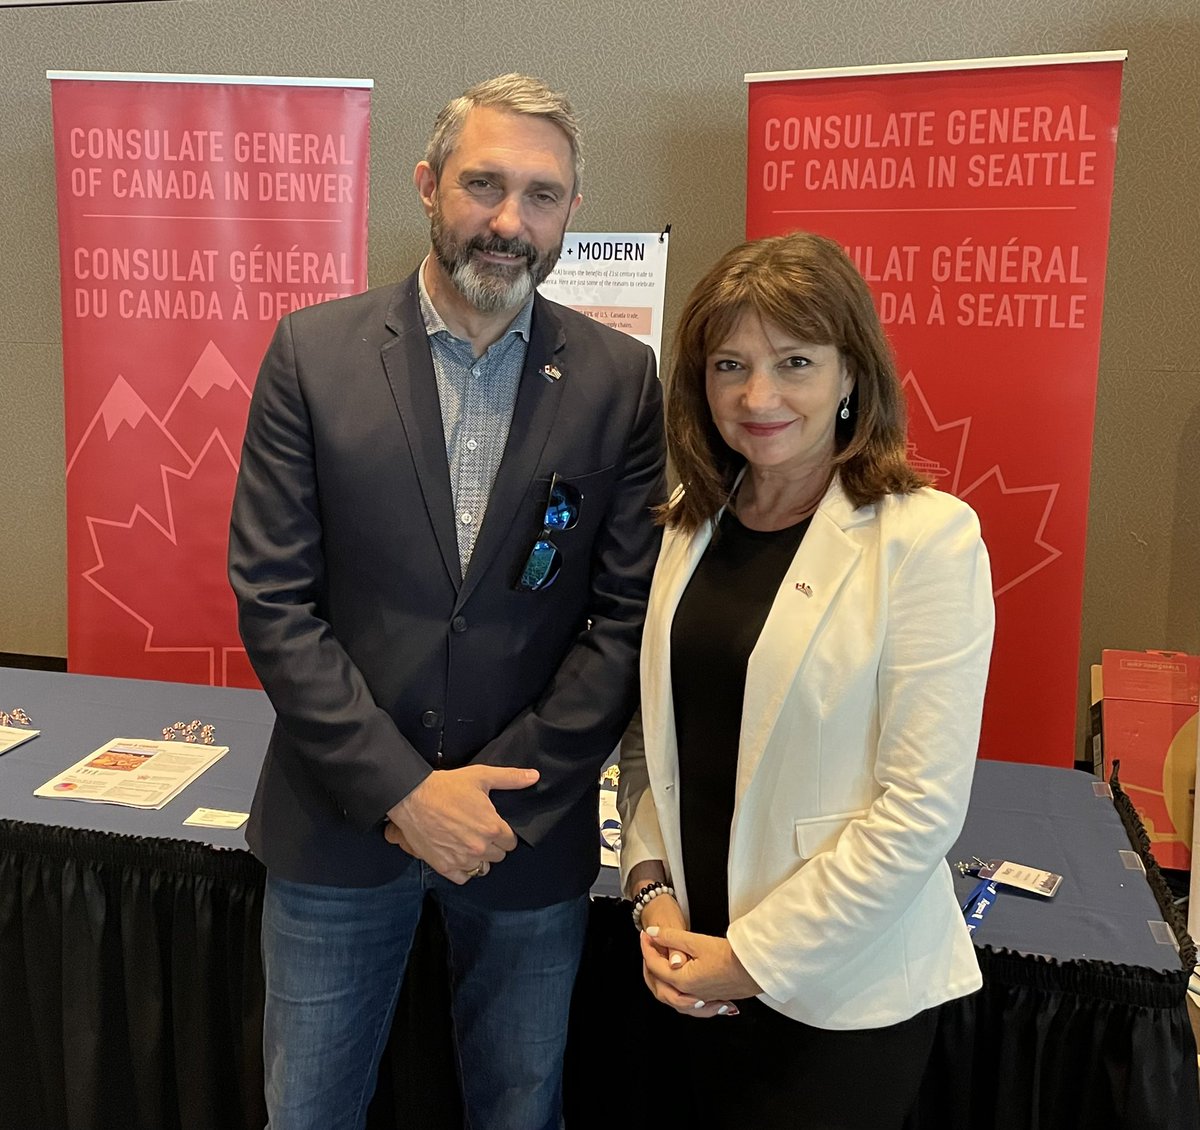 Cooperation with our partners and friends in the United States is critical for the Yukon. It was a pleasure to meet yesterday with Interim Consul General in Seattle Marcy Grossman, here at the @PNWER annual summit in Boise Idaho, to discuss some of these important topics #PNWER